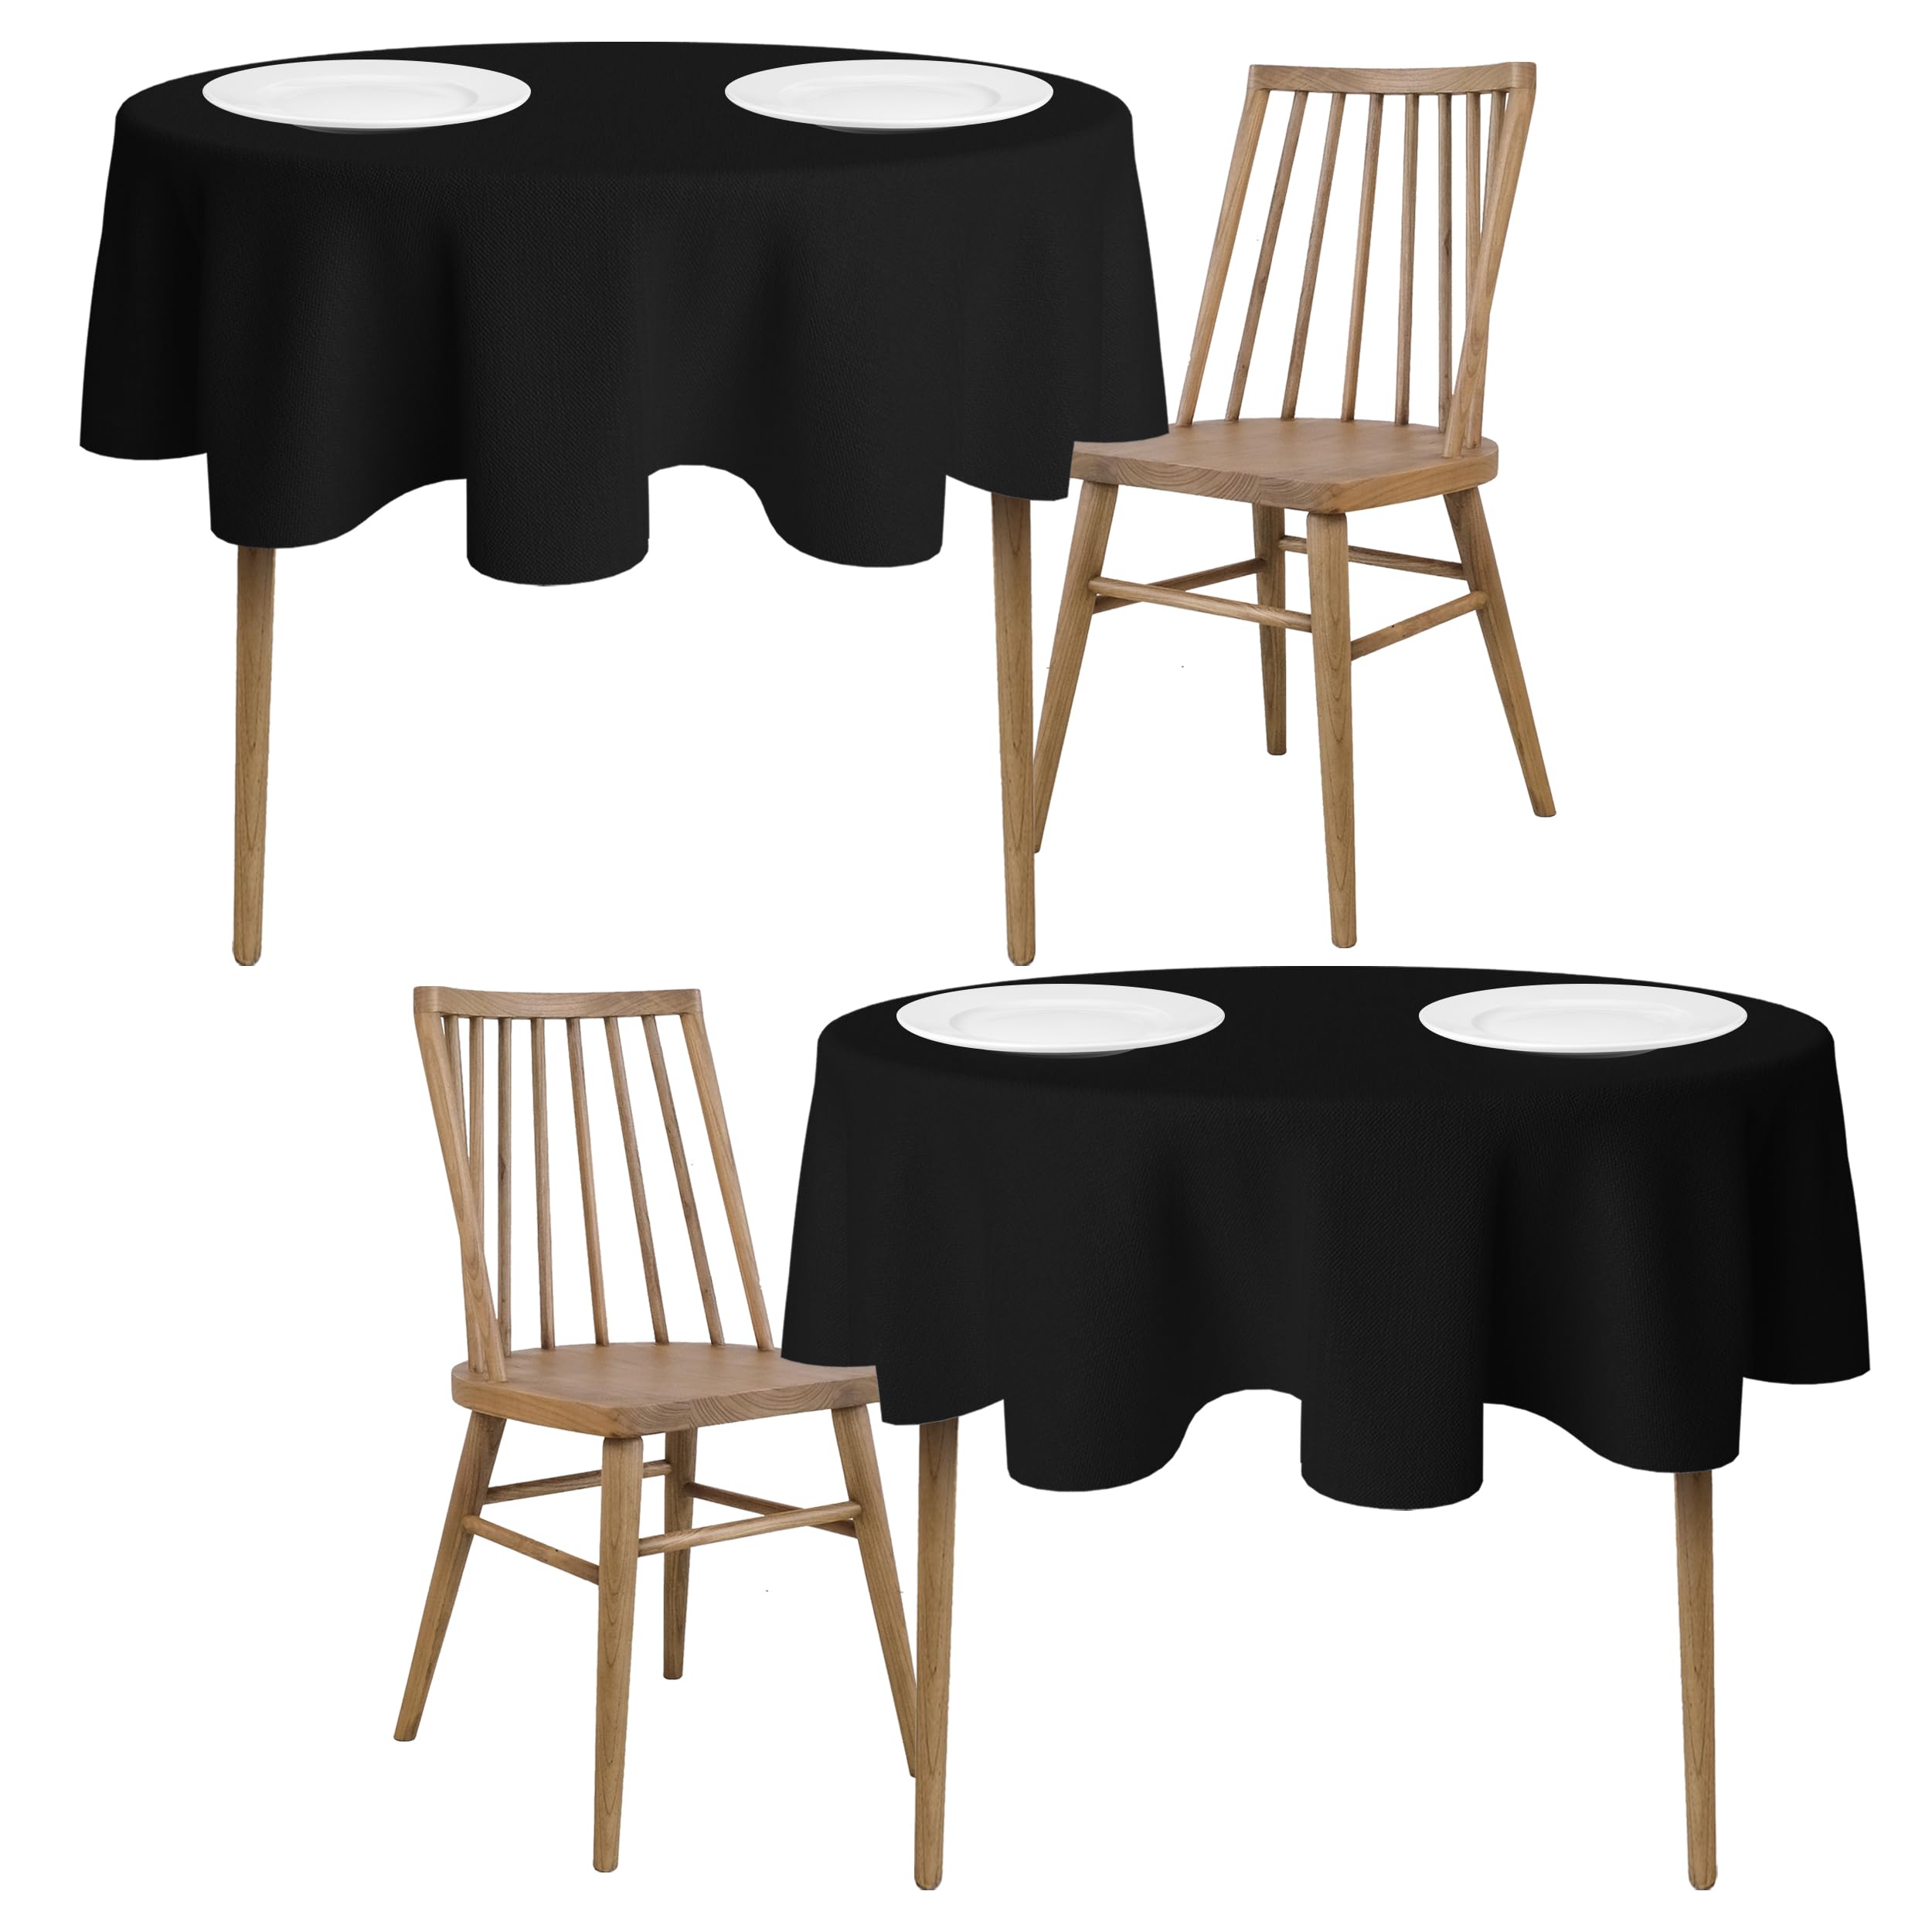 [2 Pack] 60" Round Premium Tablecloths for Wedding | Banquet | Restaurant | Washable Fabric Table Cloth  - Acceptable